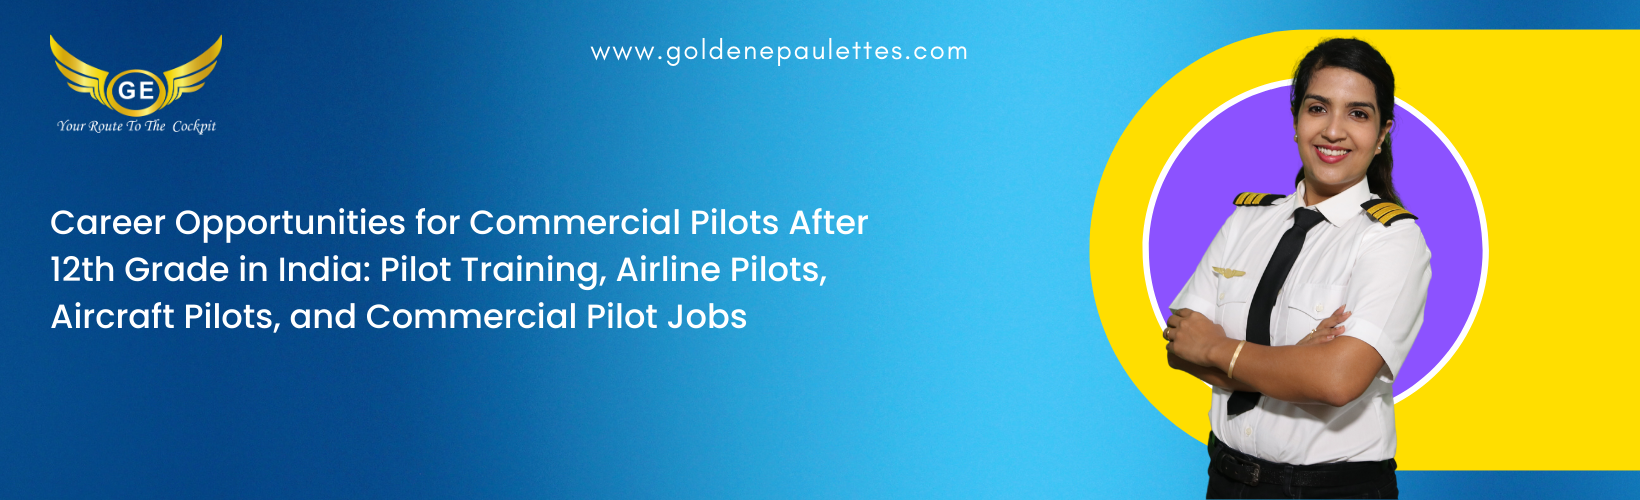 What Are the Career Opportunities for Commercial Pilots After 12th in India